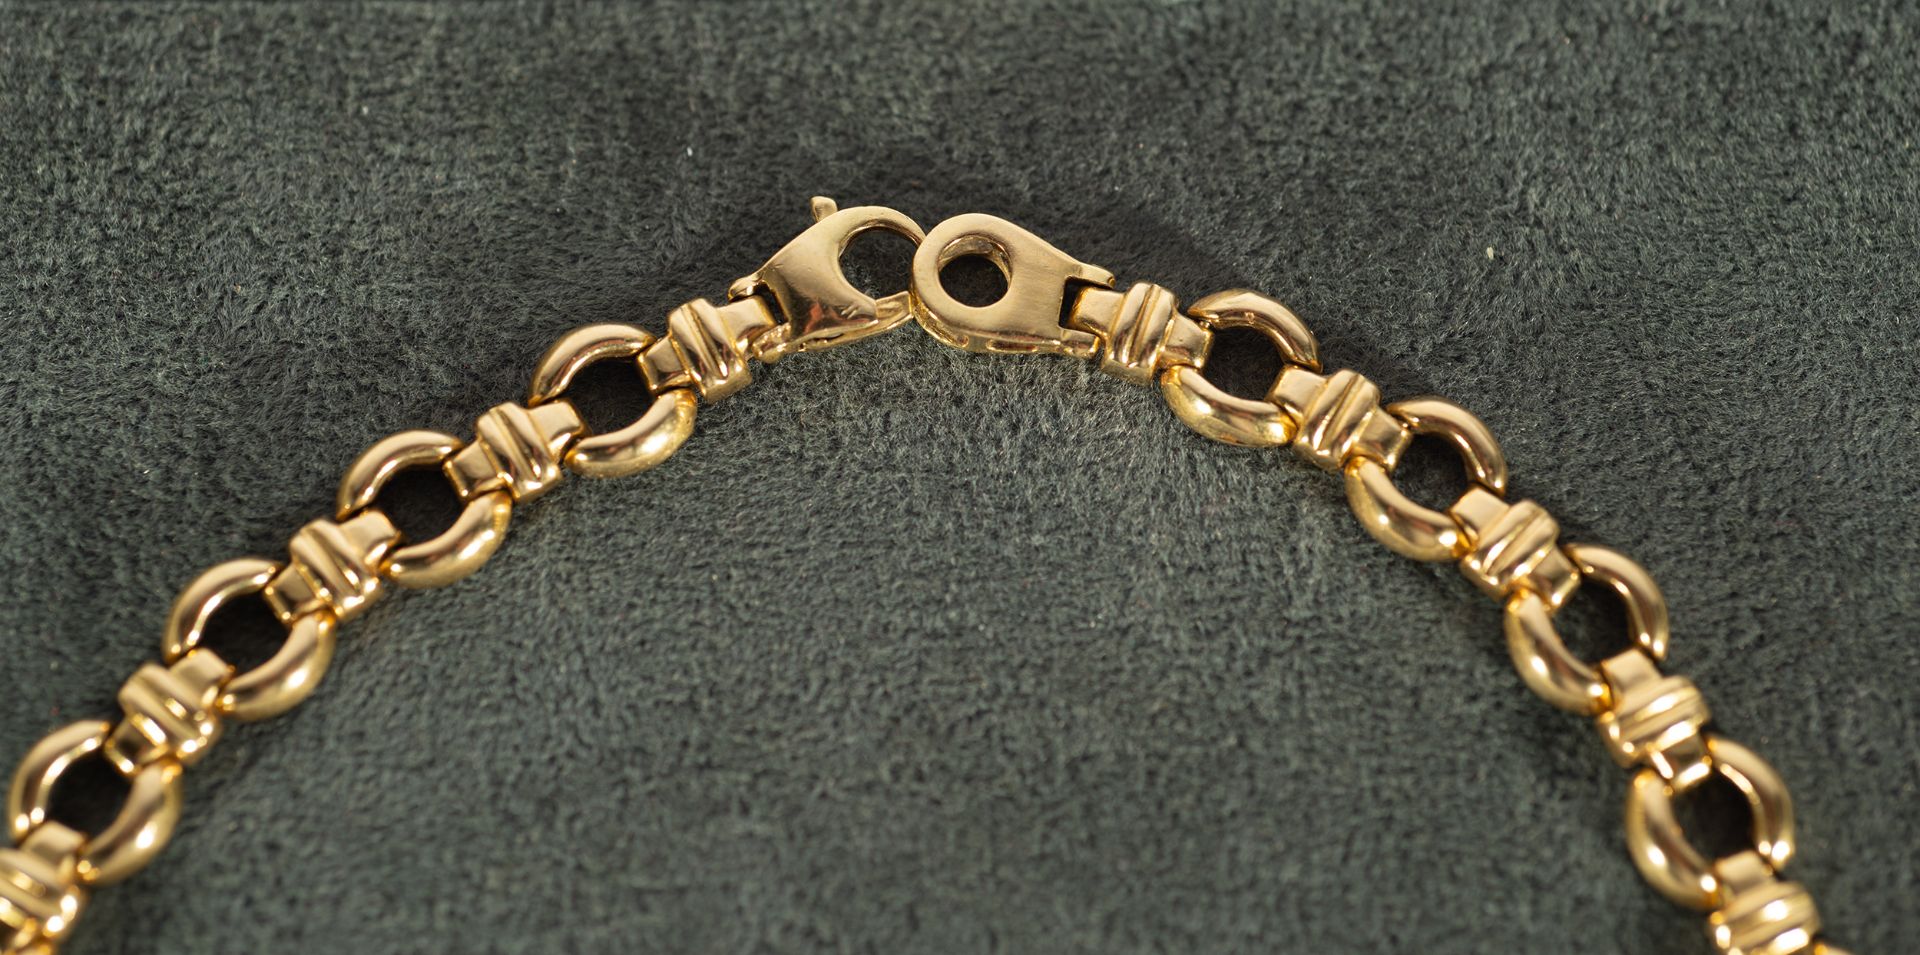 Lady necklace in solid gold, 1990s - Image 4 of 5